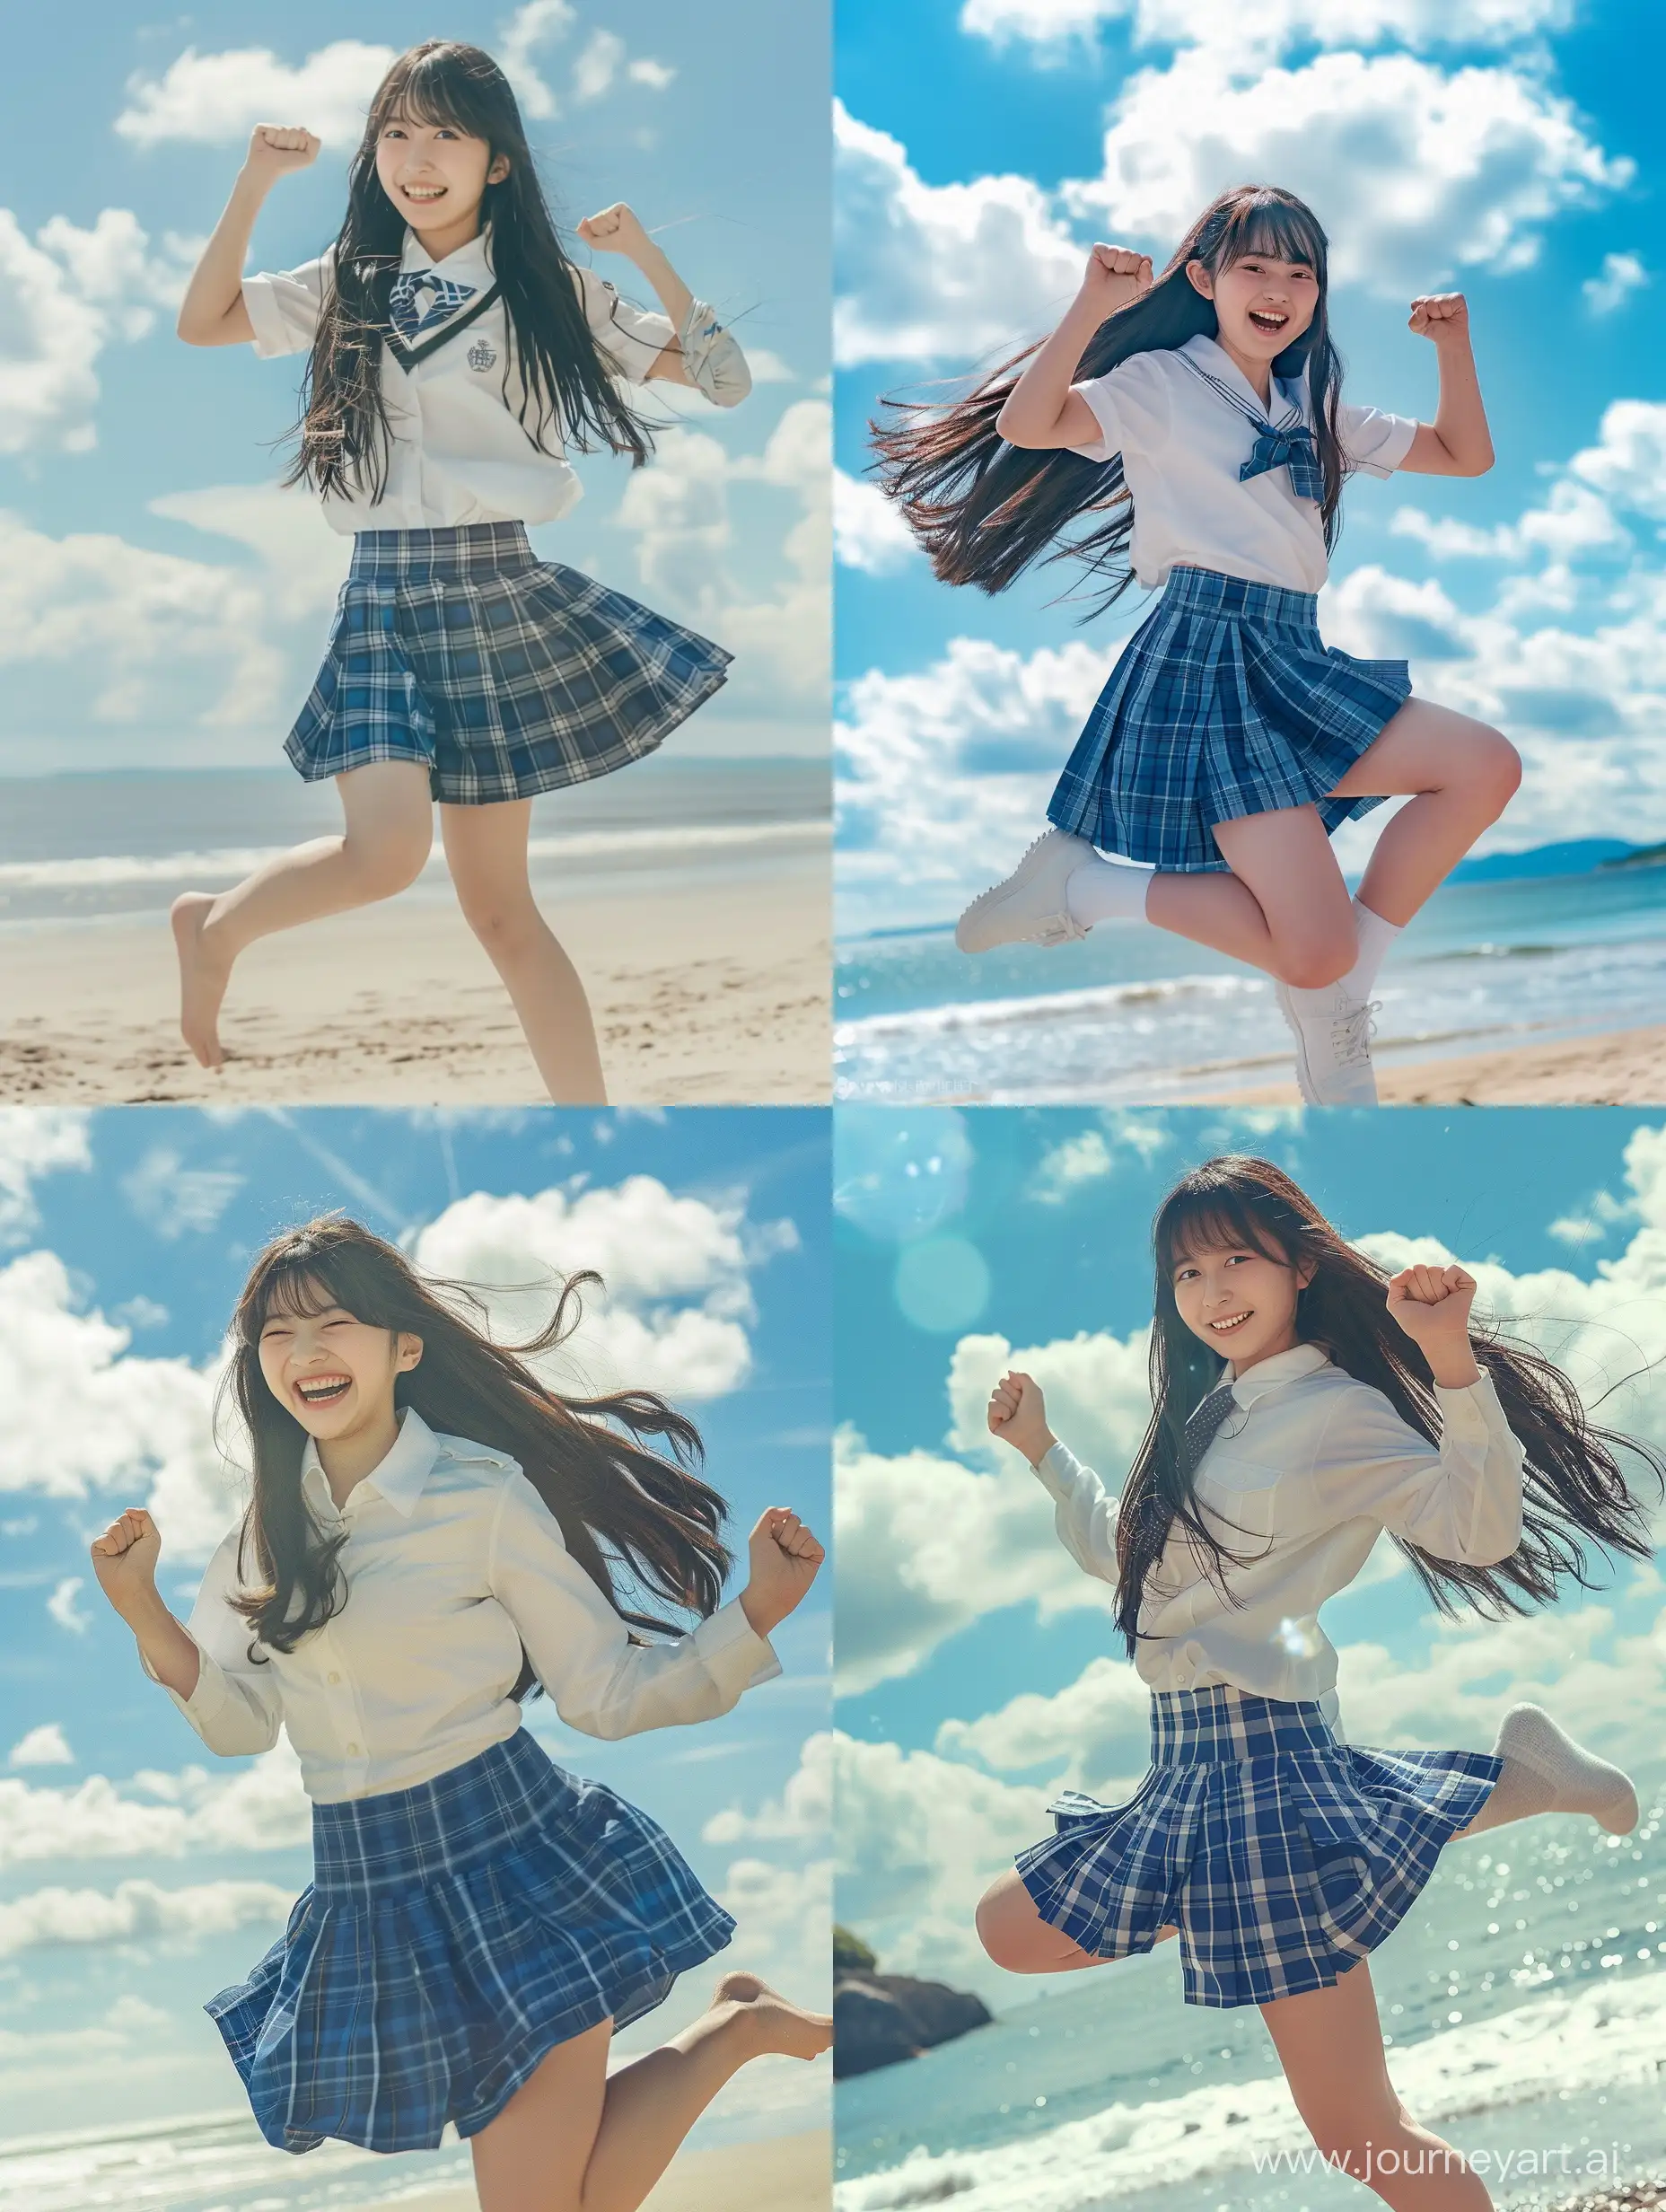 Showing a 24-year-old cute Japanese girl with long hair, sweet smile, old photo album from the 80s, captured at a wide shot, captured at a low angle, shot with the beauty of a movie camera, Japanese high school student in school uniform, white shirt, blue plaid skirt , outdoors at the seaside, flexing your feet while jumping on the beach, raising your right hand in a fist, The sky should have fluffy white clouds and a bright blue background. Posing in different photo poses, recalling the nostalgia of film photography Atmosphere. Emphasize soft natural light, clear lighting, and slightly increase graininess to enhance the timeless and lively feel of this moment. Warm, realistic, cinematic, stunningly beautiful girls, stylish print ads